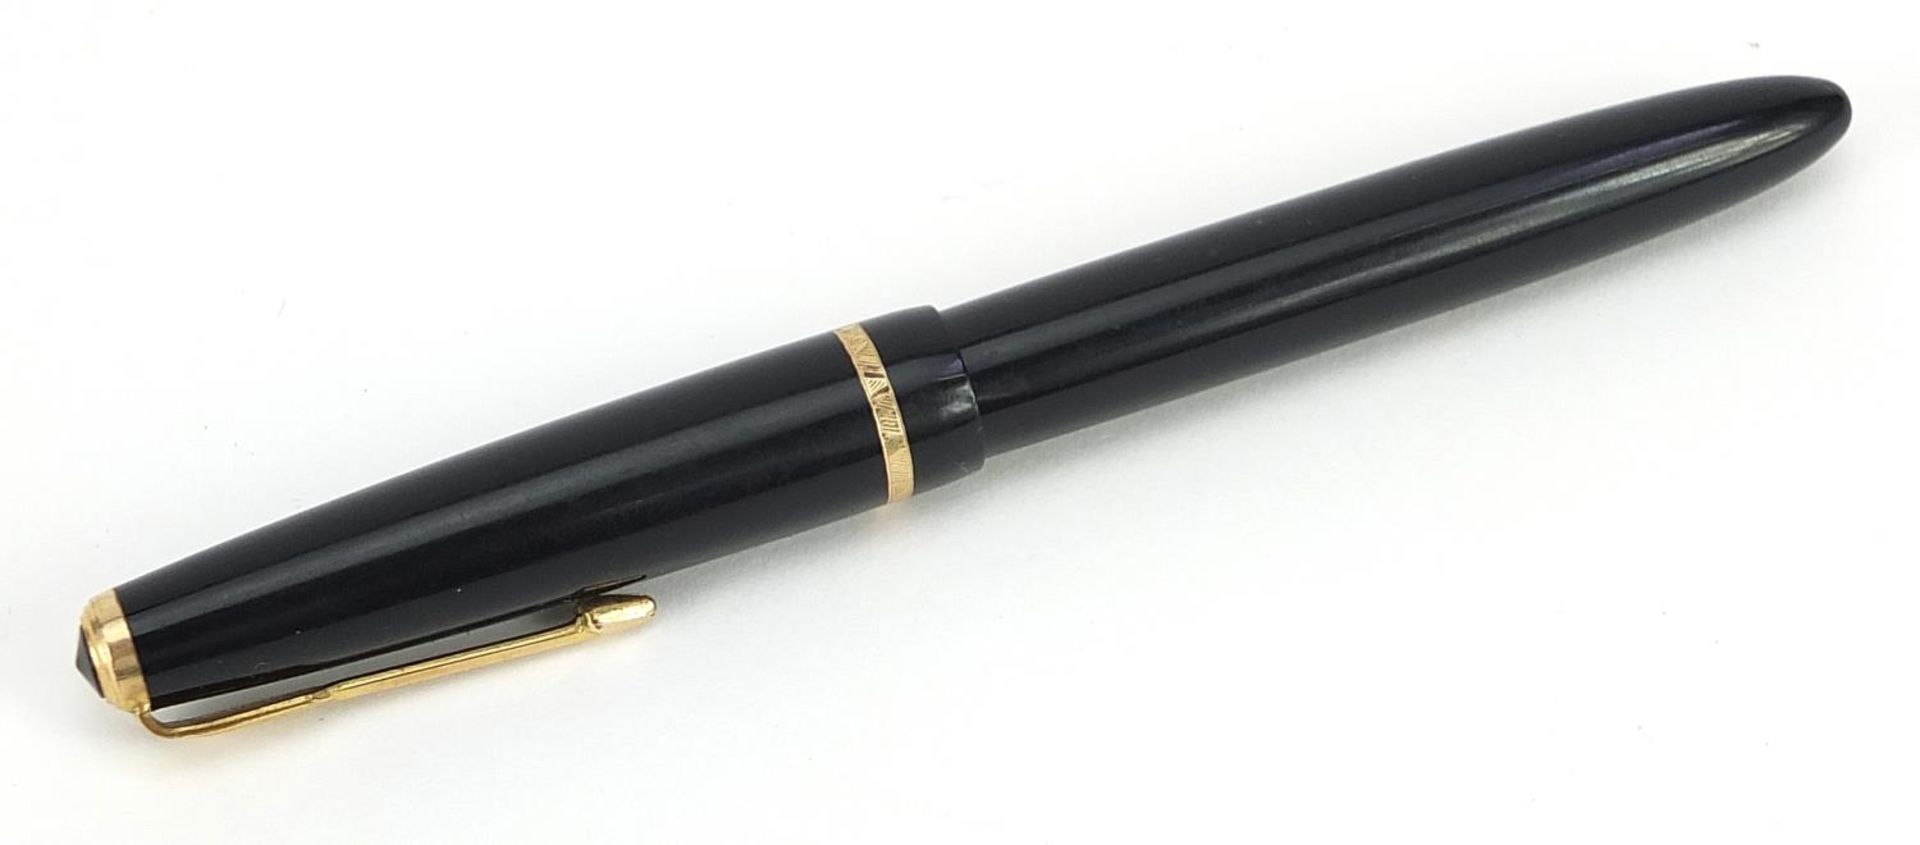 Parker Slimfold fountain pen with 14ct gold nib - Image 3 of 3